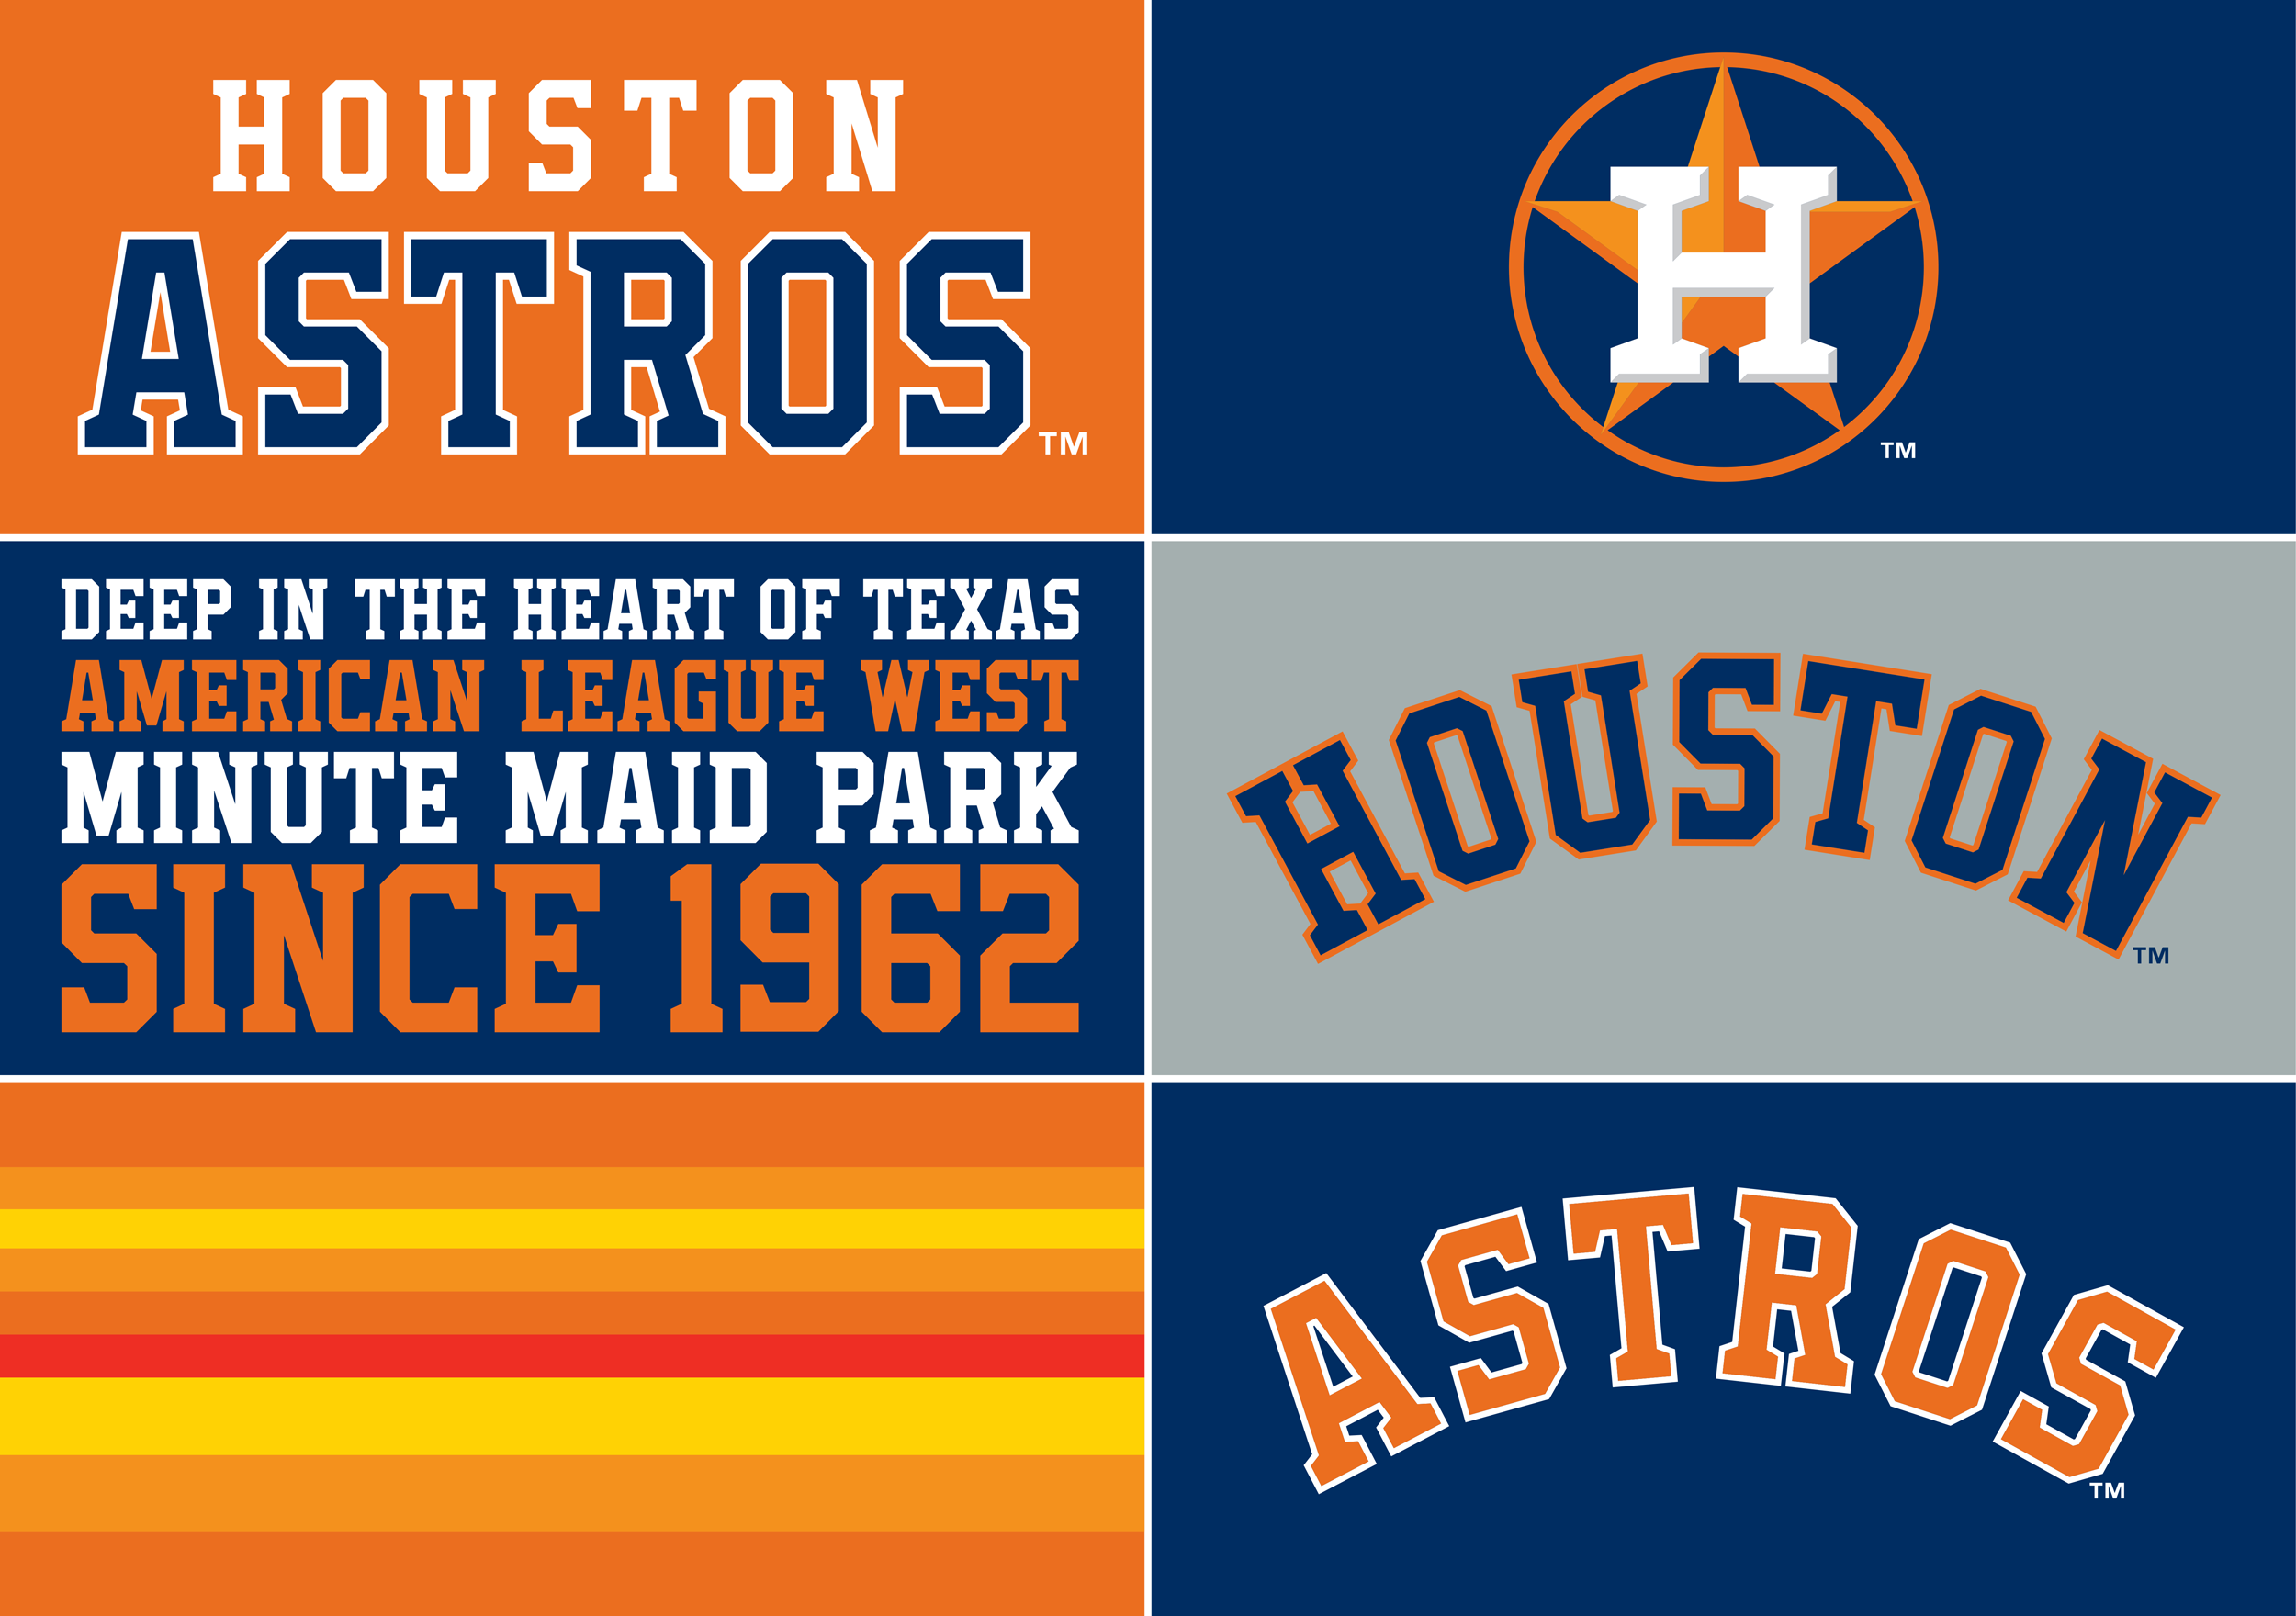 The history behind the Houston Astros' 'Tequila Sunrise' jerseys